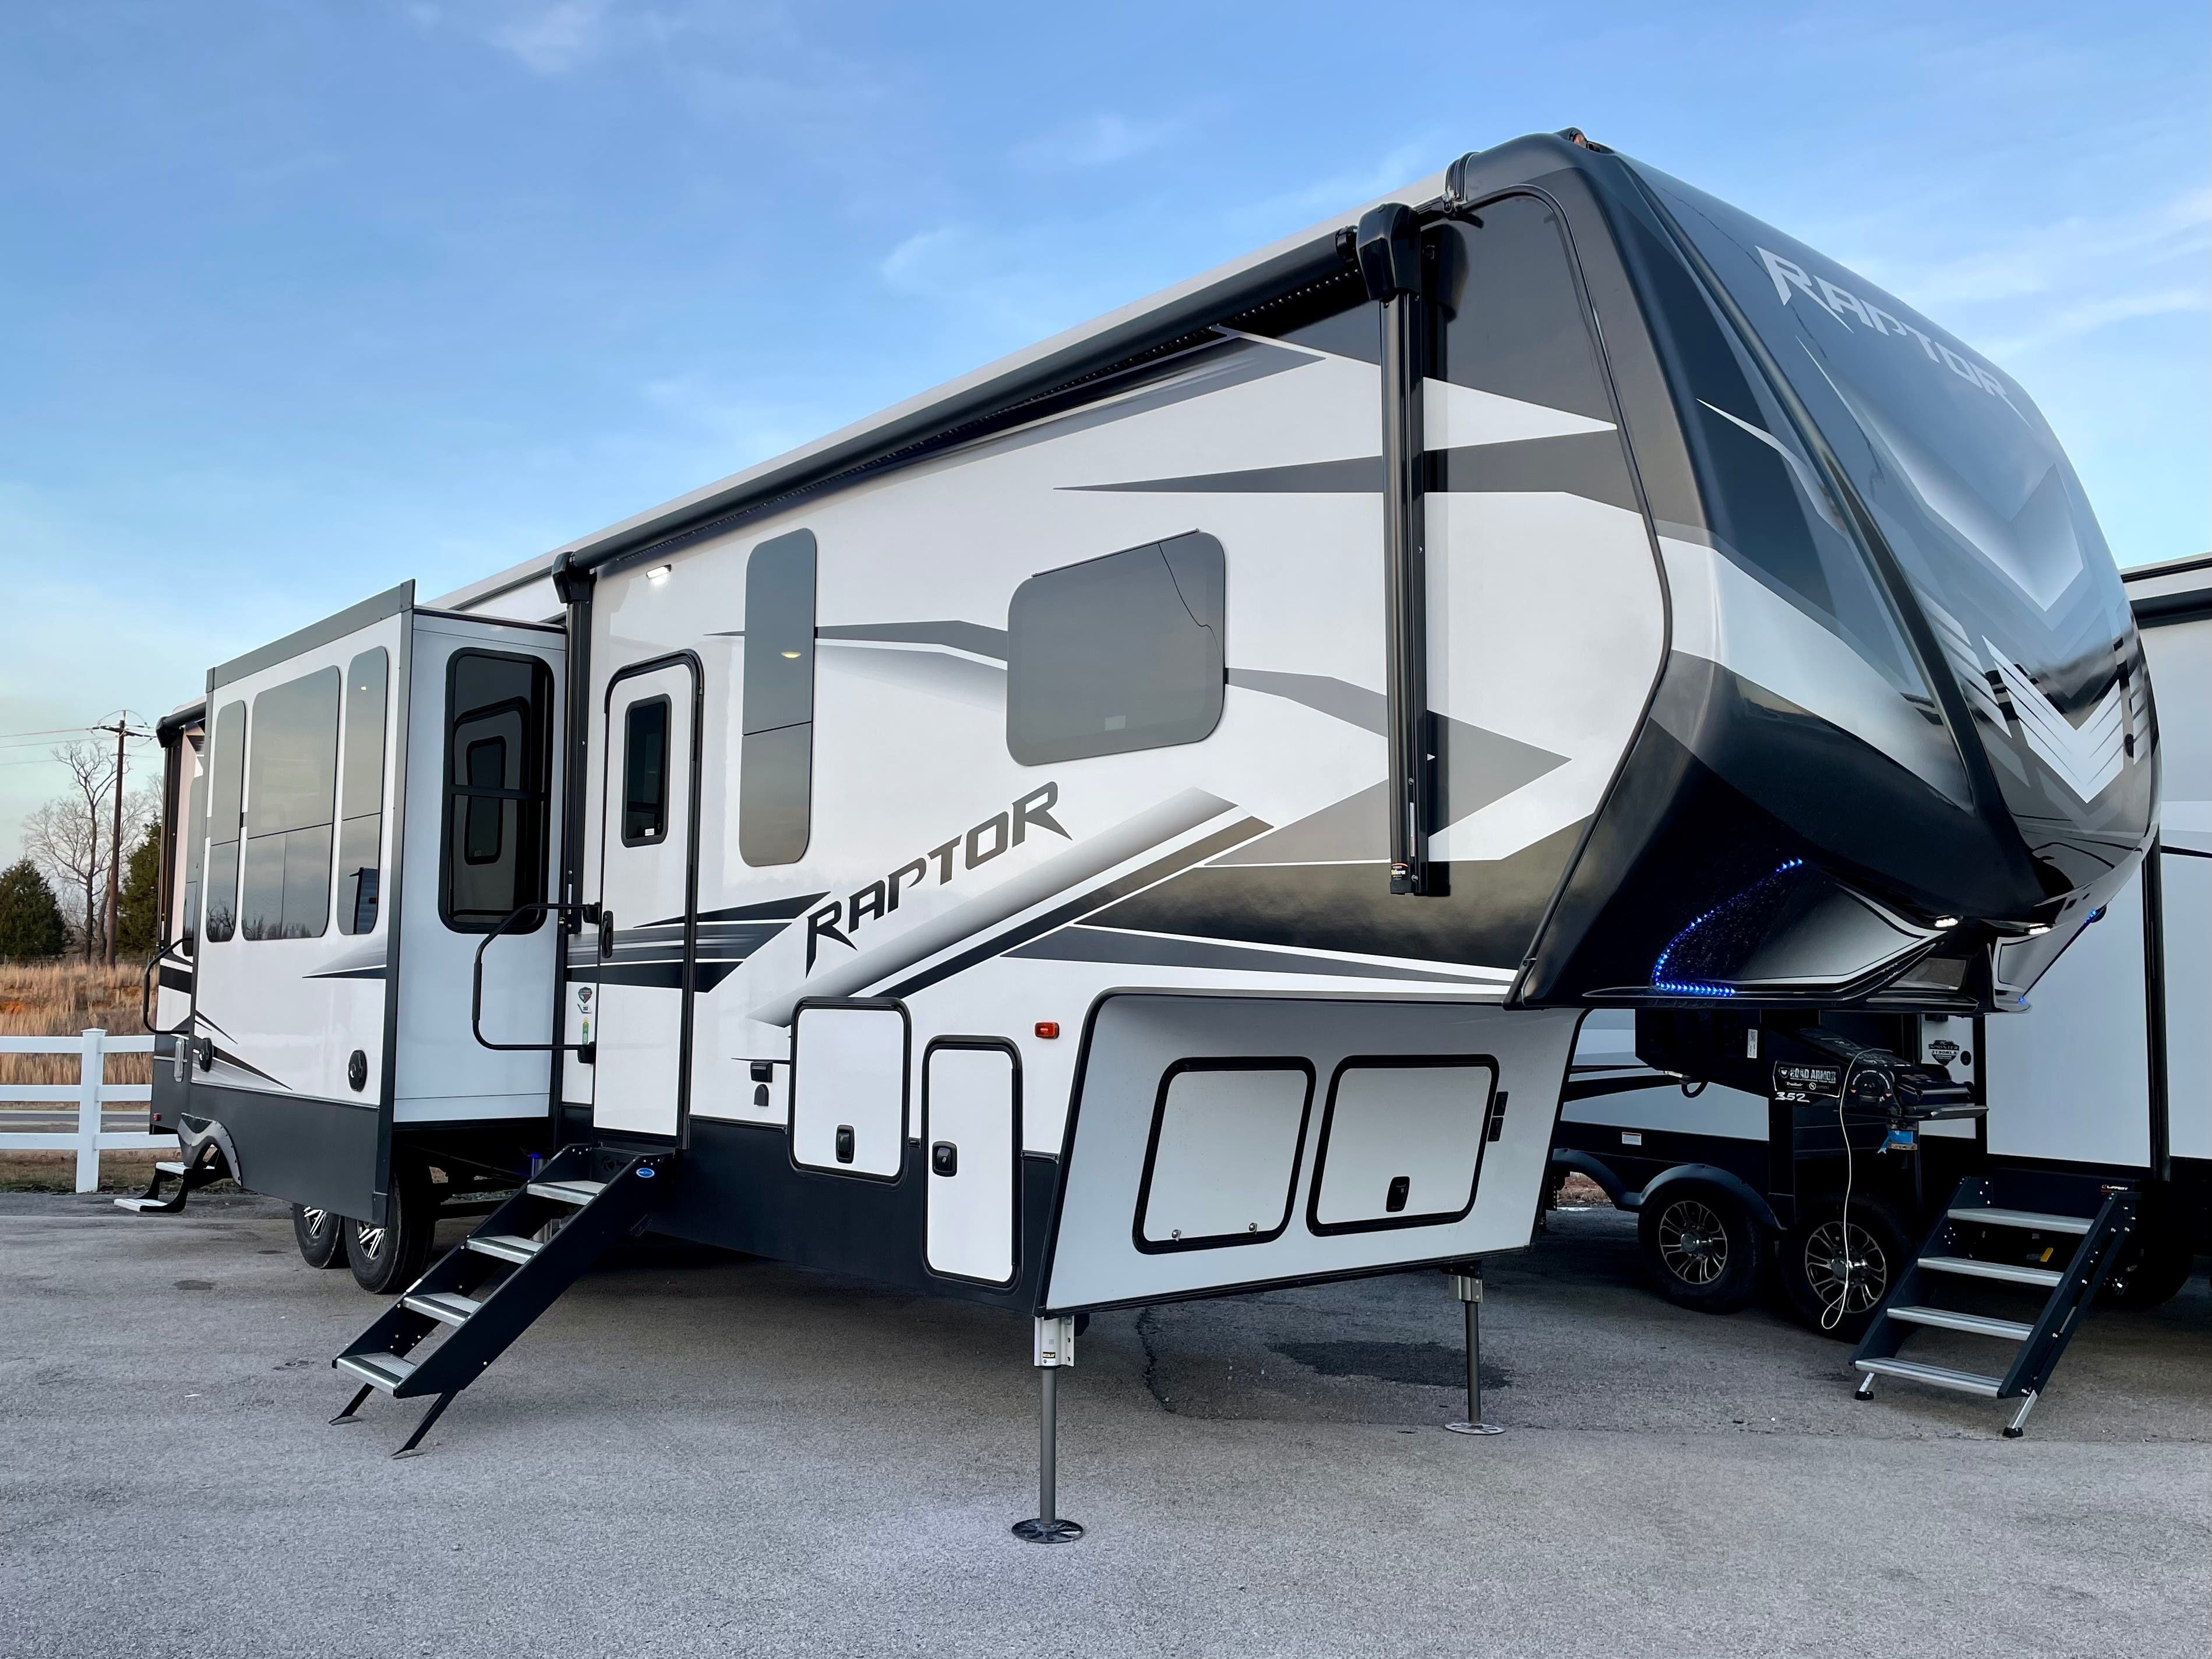 RVs for Sale In Tennessee & Kentucky ...